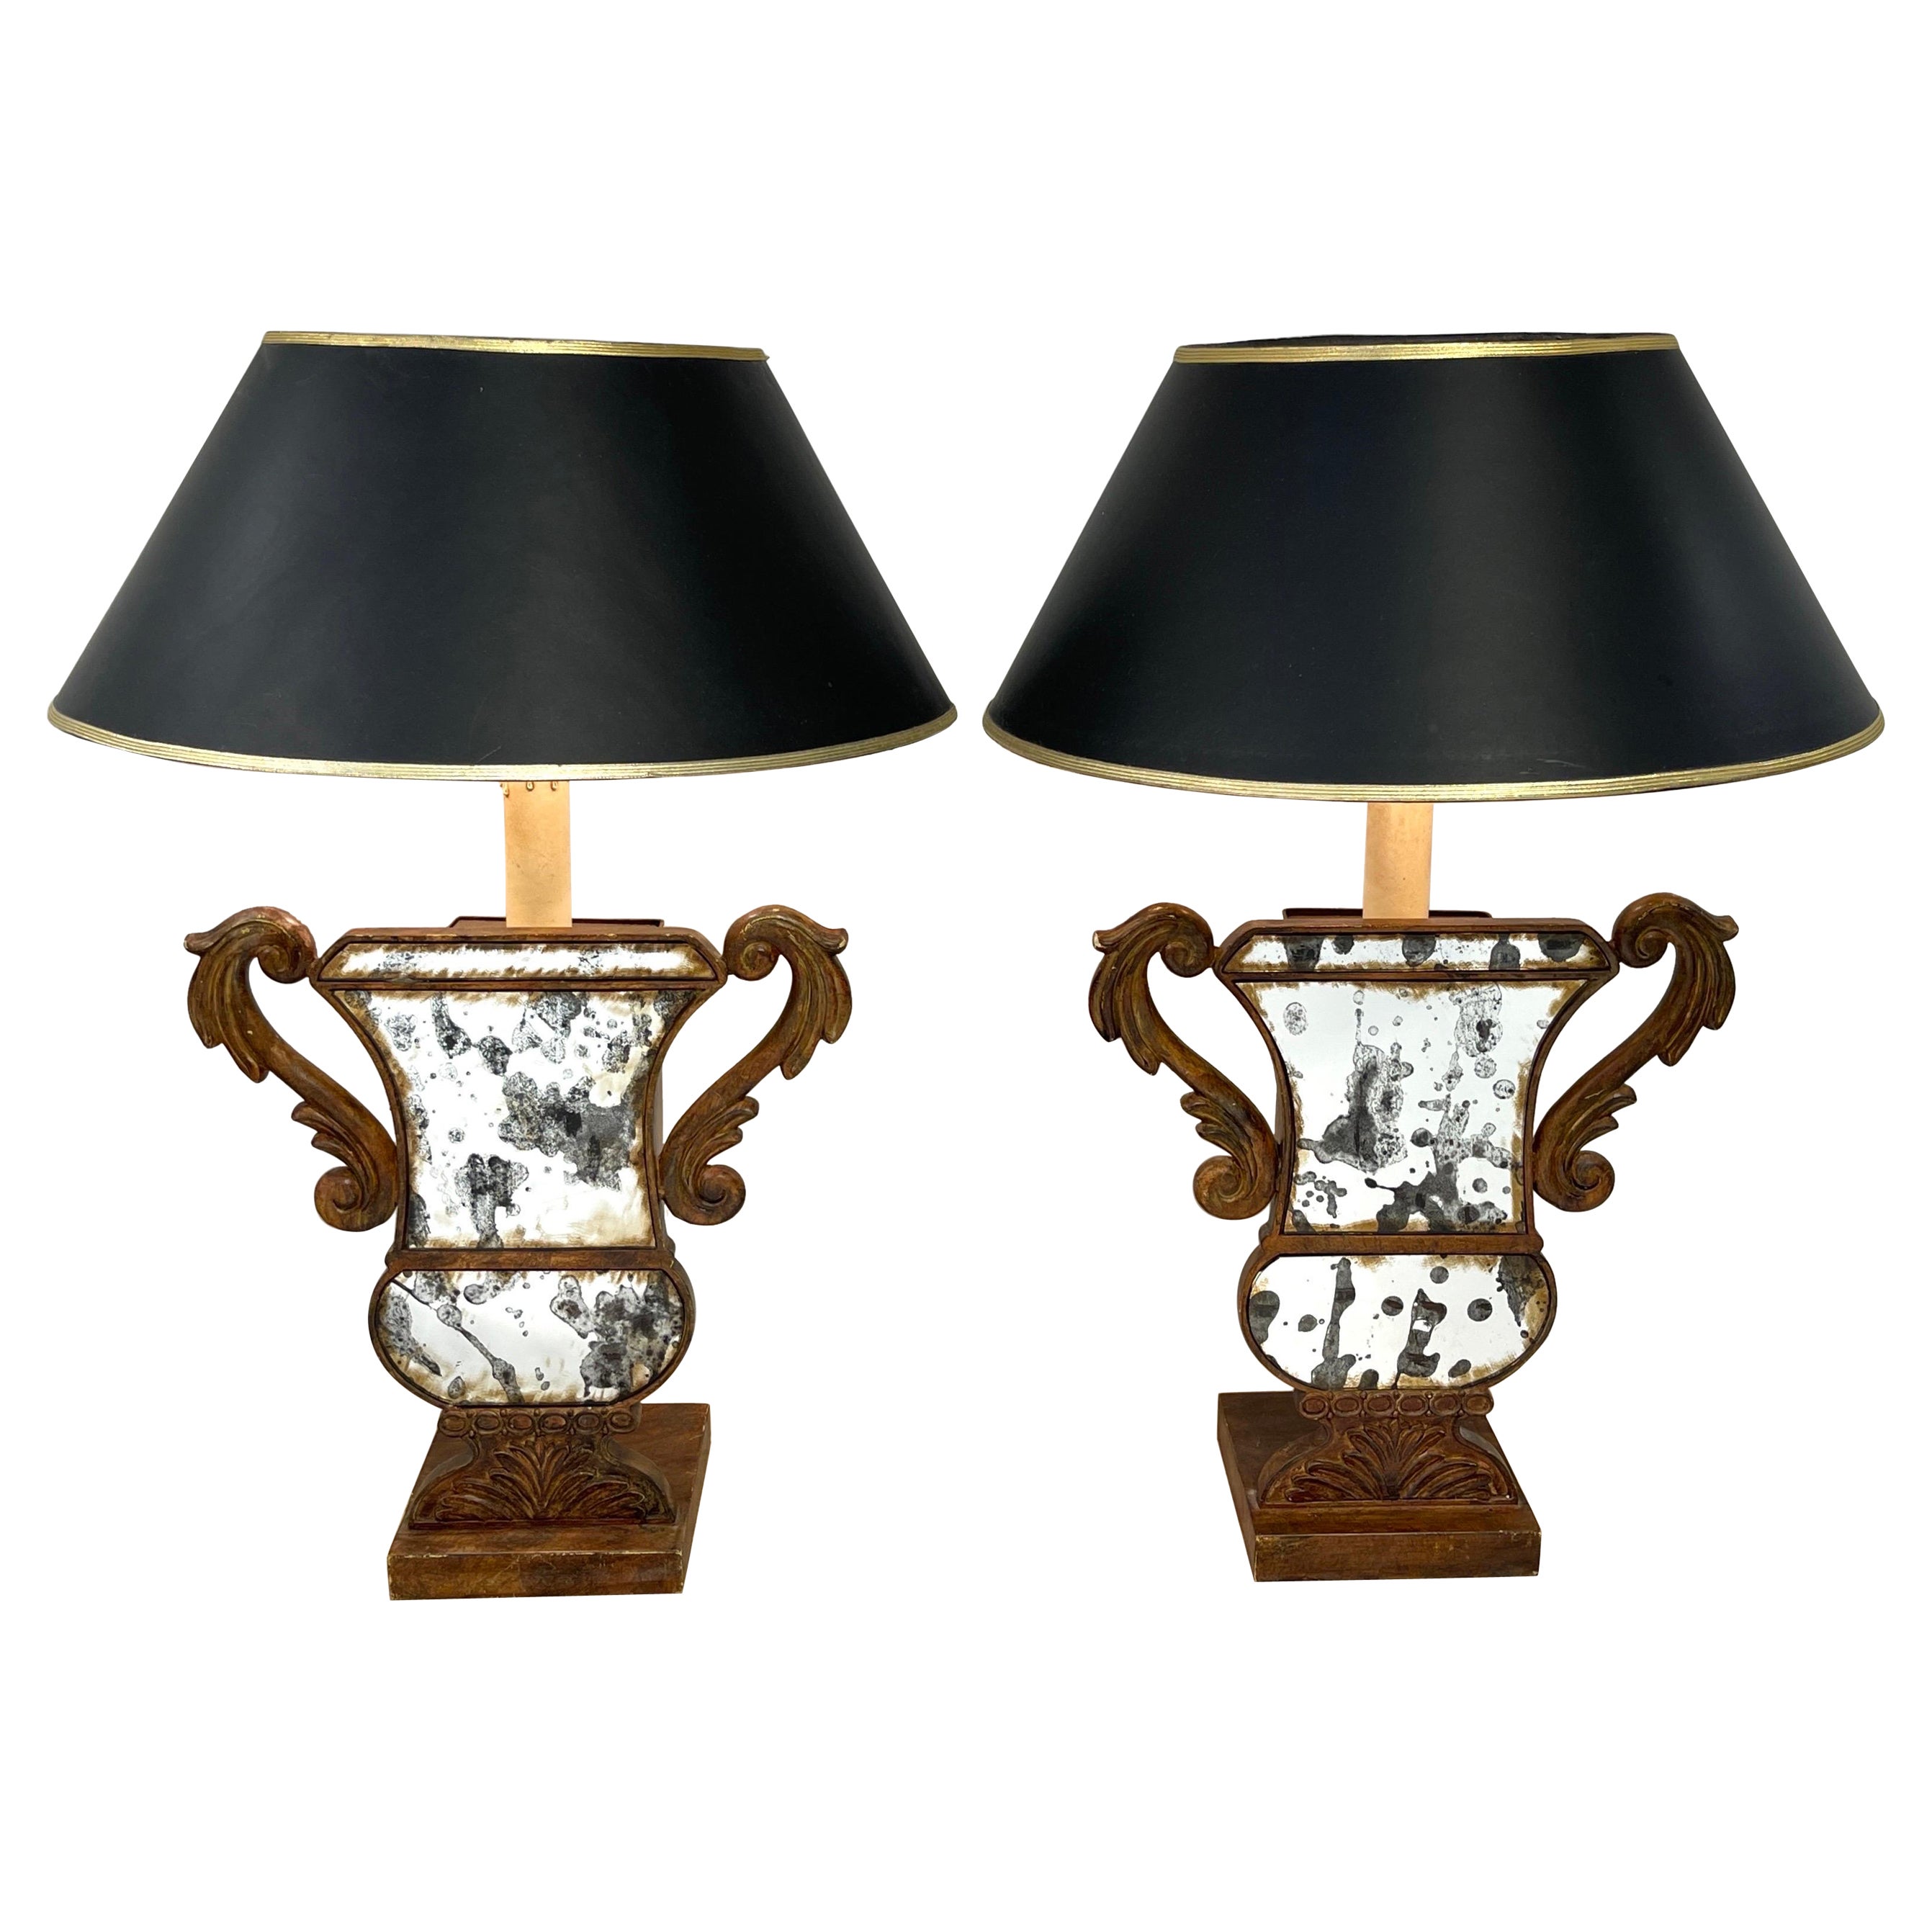 A Pair of Neoclassical Tole & Eglomise Mirrored Urn Motif Lamps